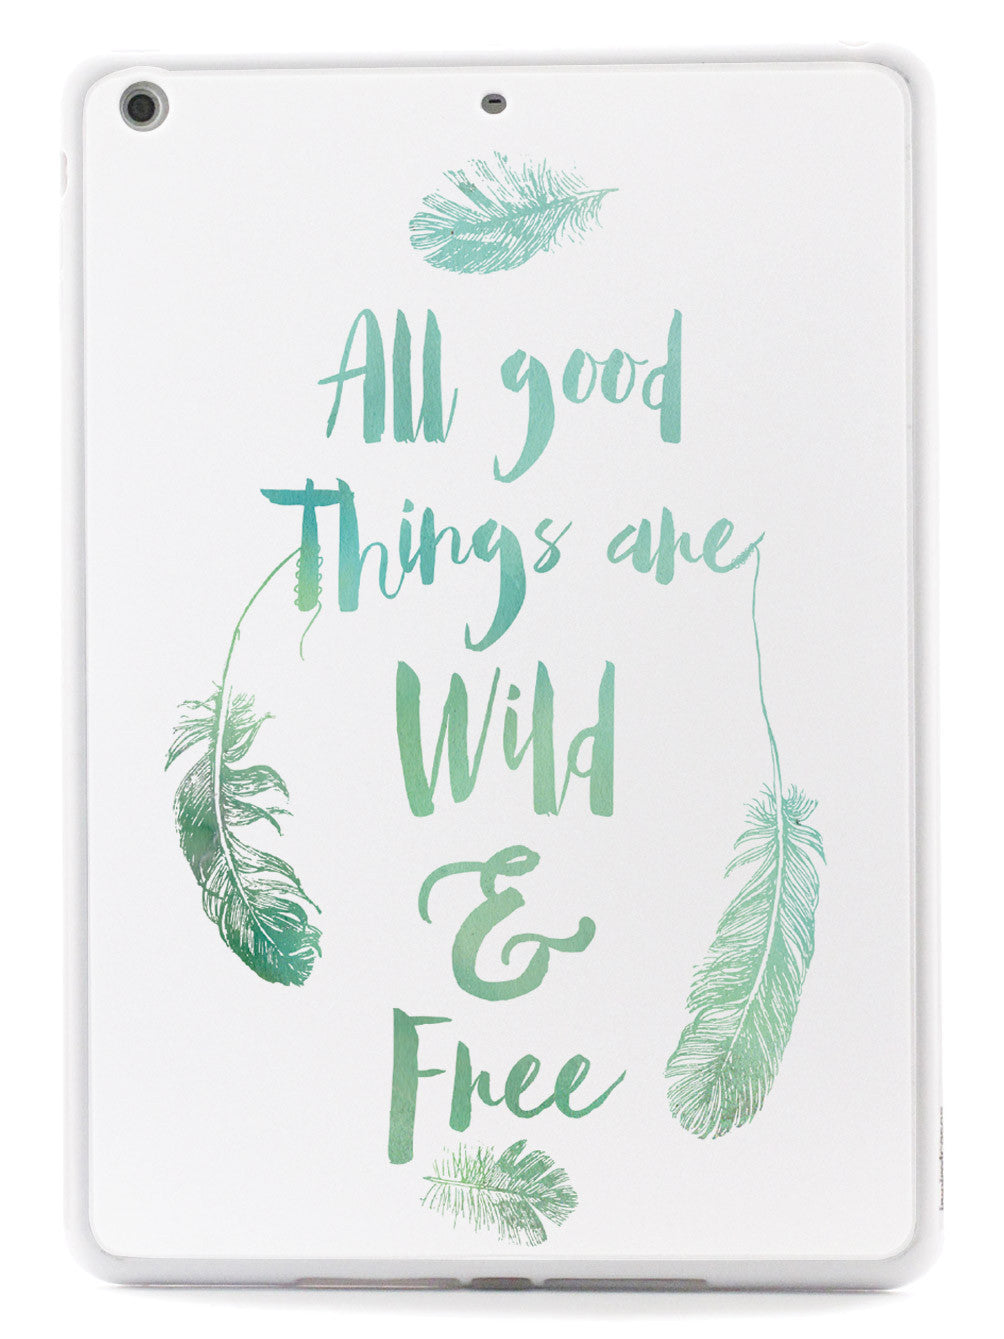 All Good Things Are Wild and Free Case